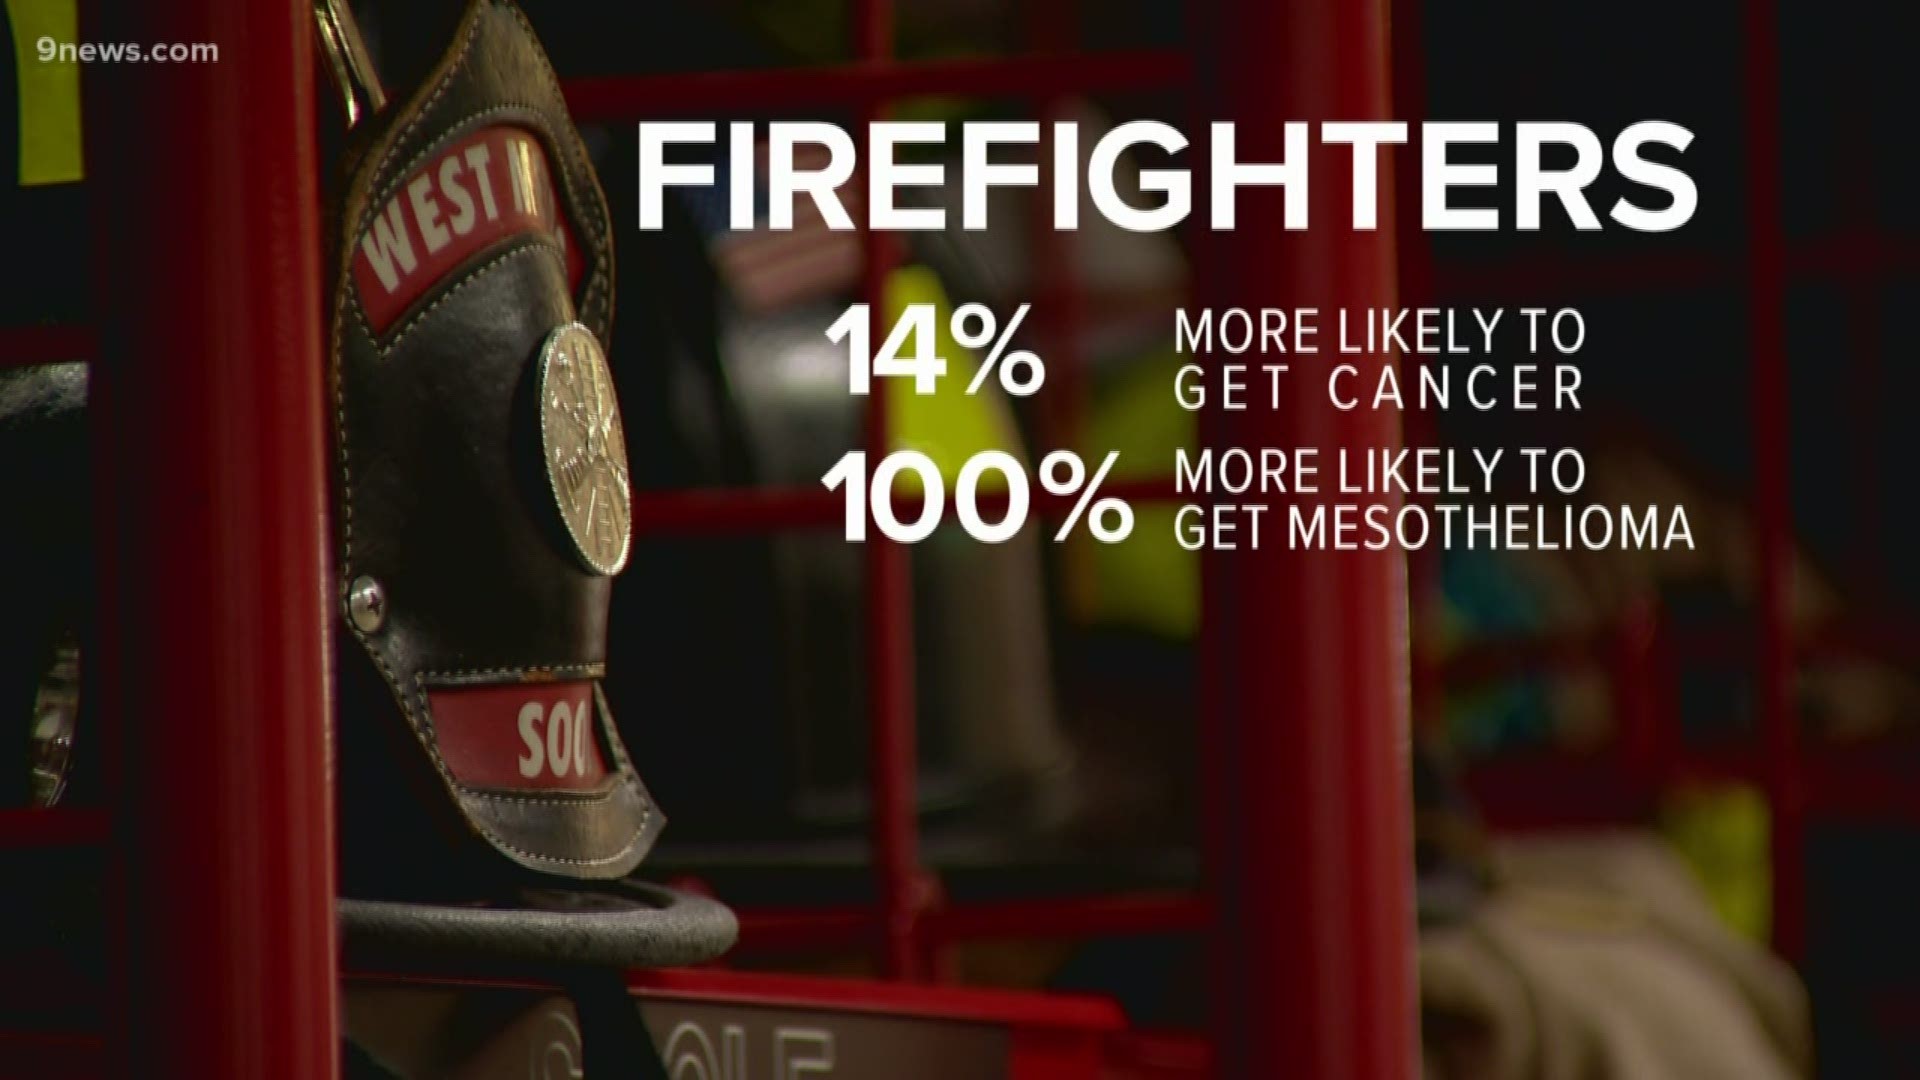 The International Association of Firefighters says firefighters are 14% more likely than the rest of the population to get cancer.